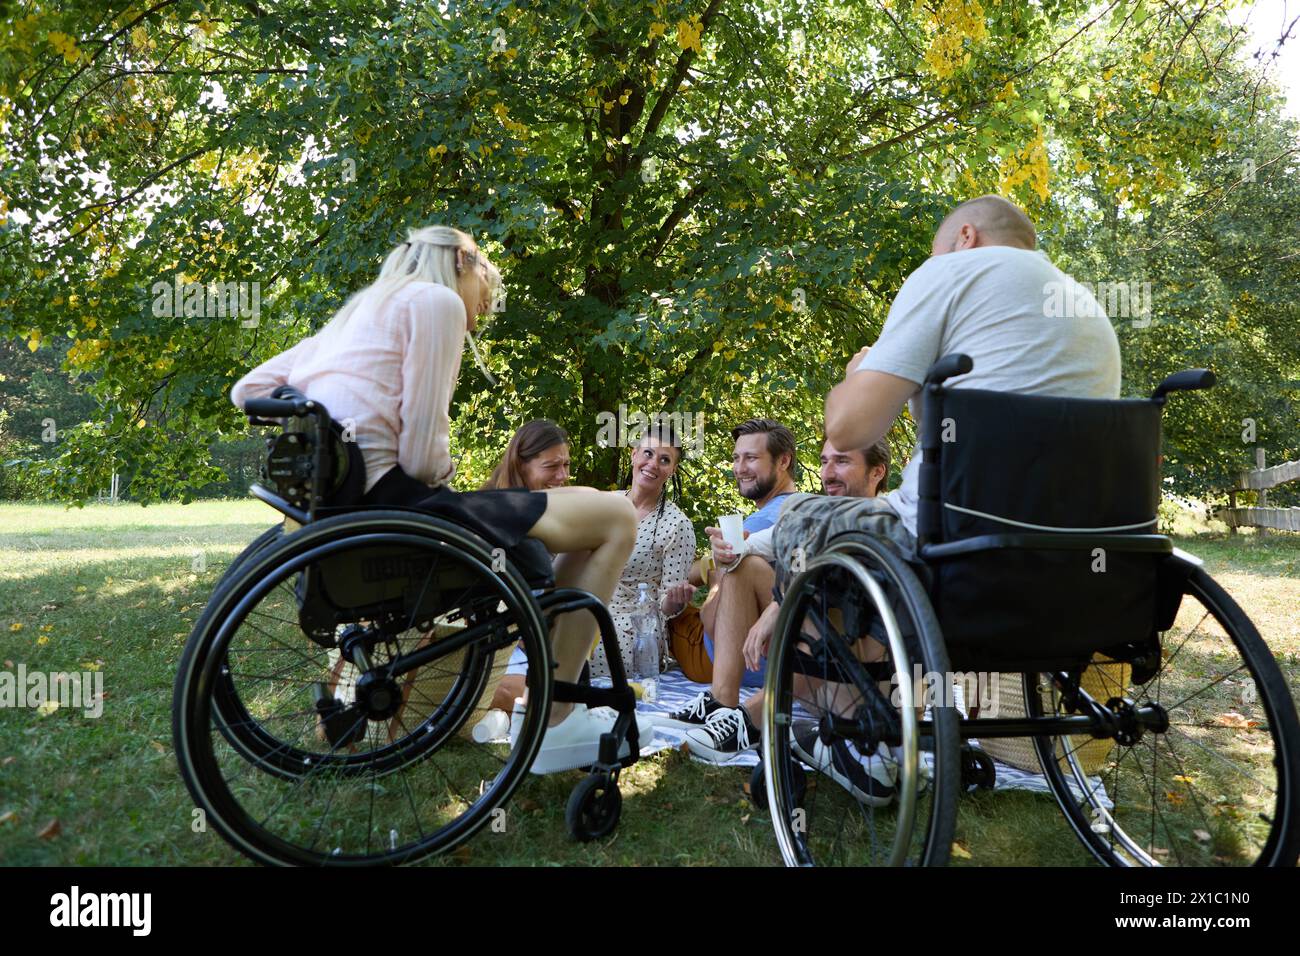 Group of friends enjoying a picnic in the park, showcasing persons using wheelchairs in a relaxed, inclusive setting. Stock Photo